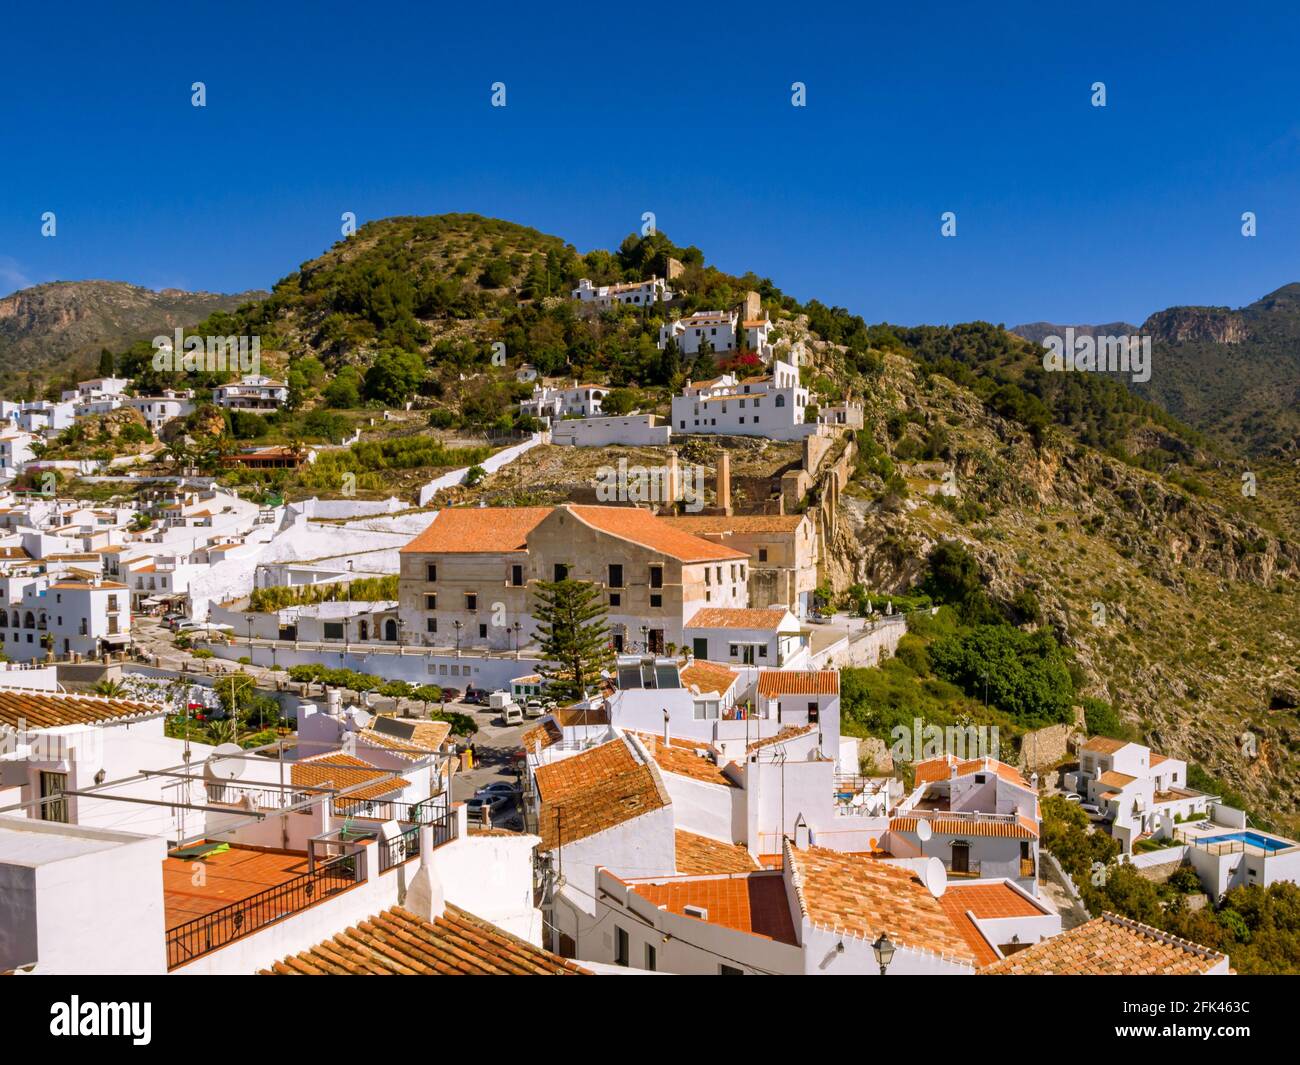 The town square and mountains of Frigiliana in Andalusia Spain Stock Photo